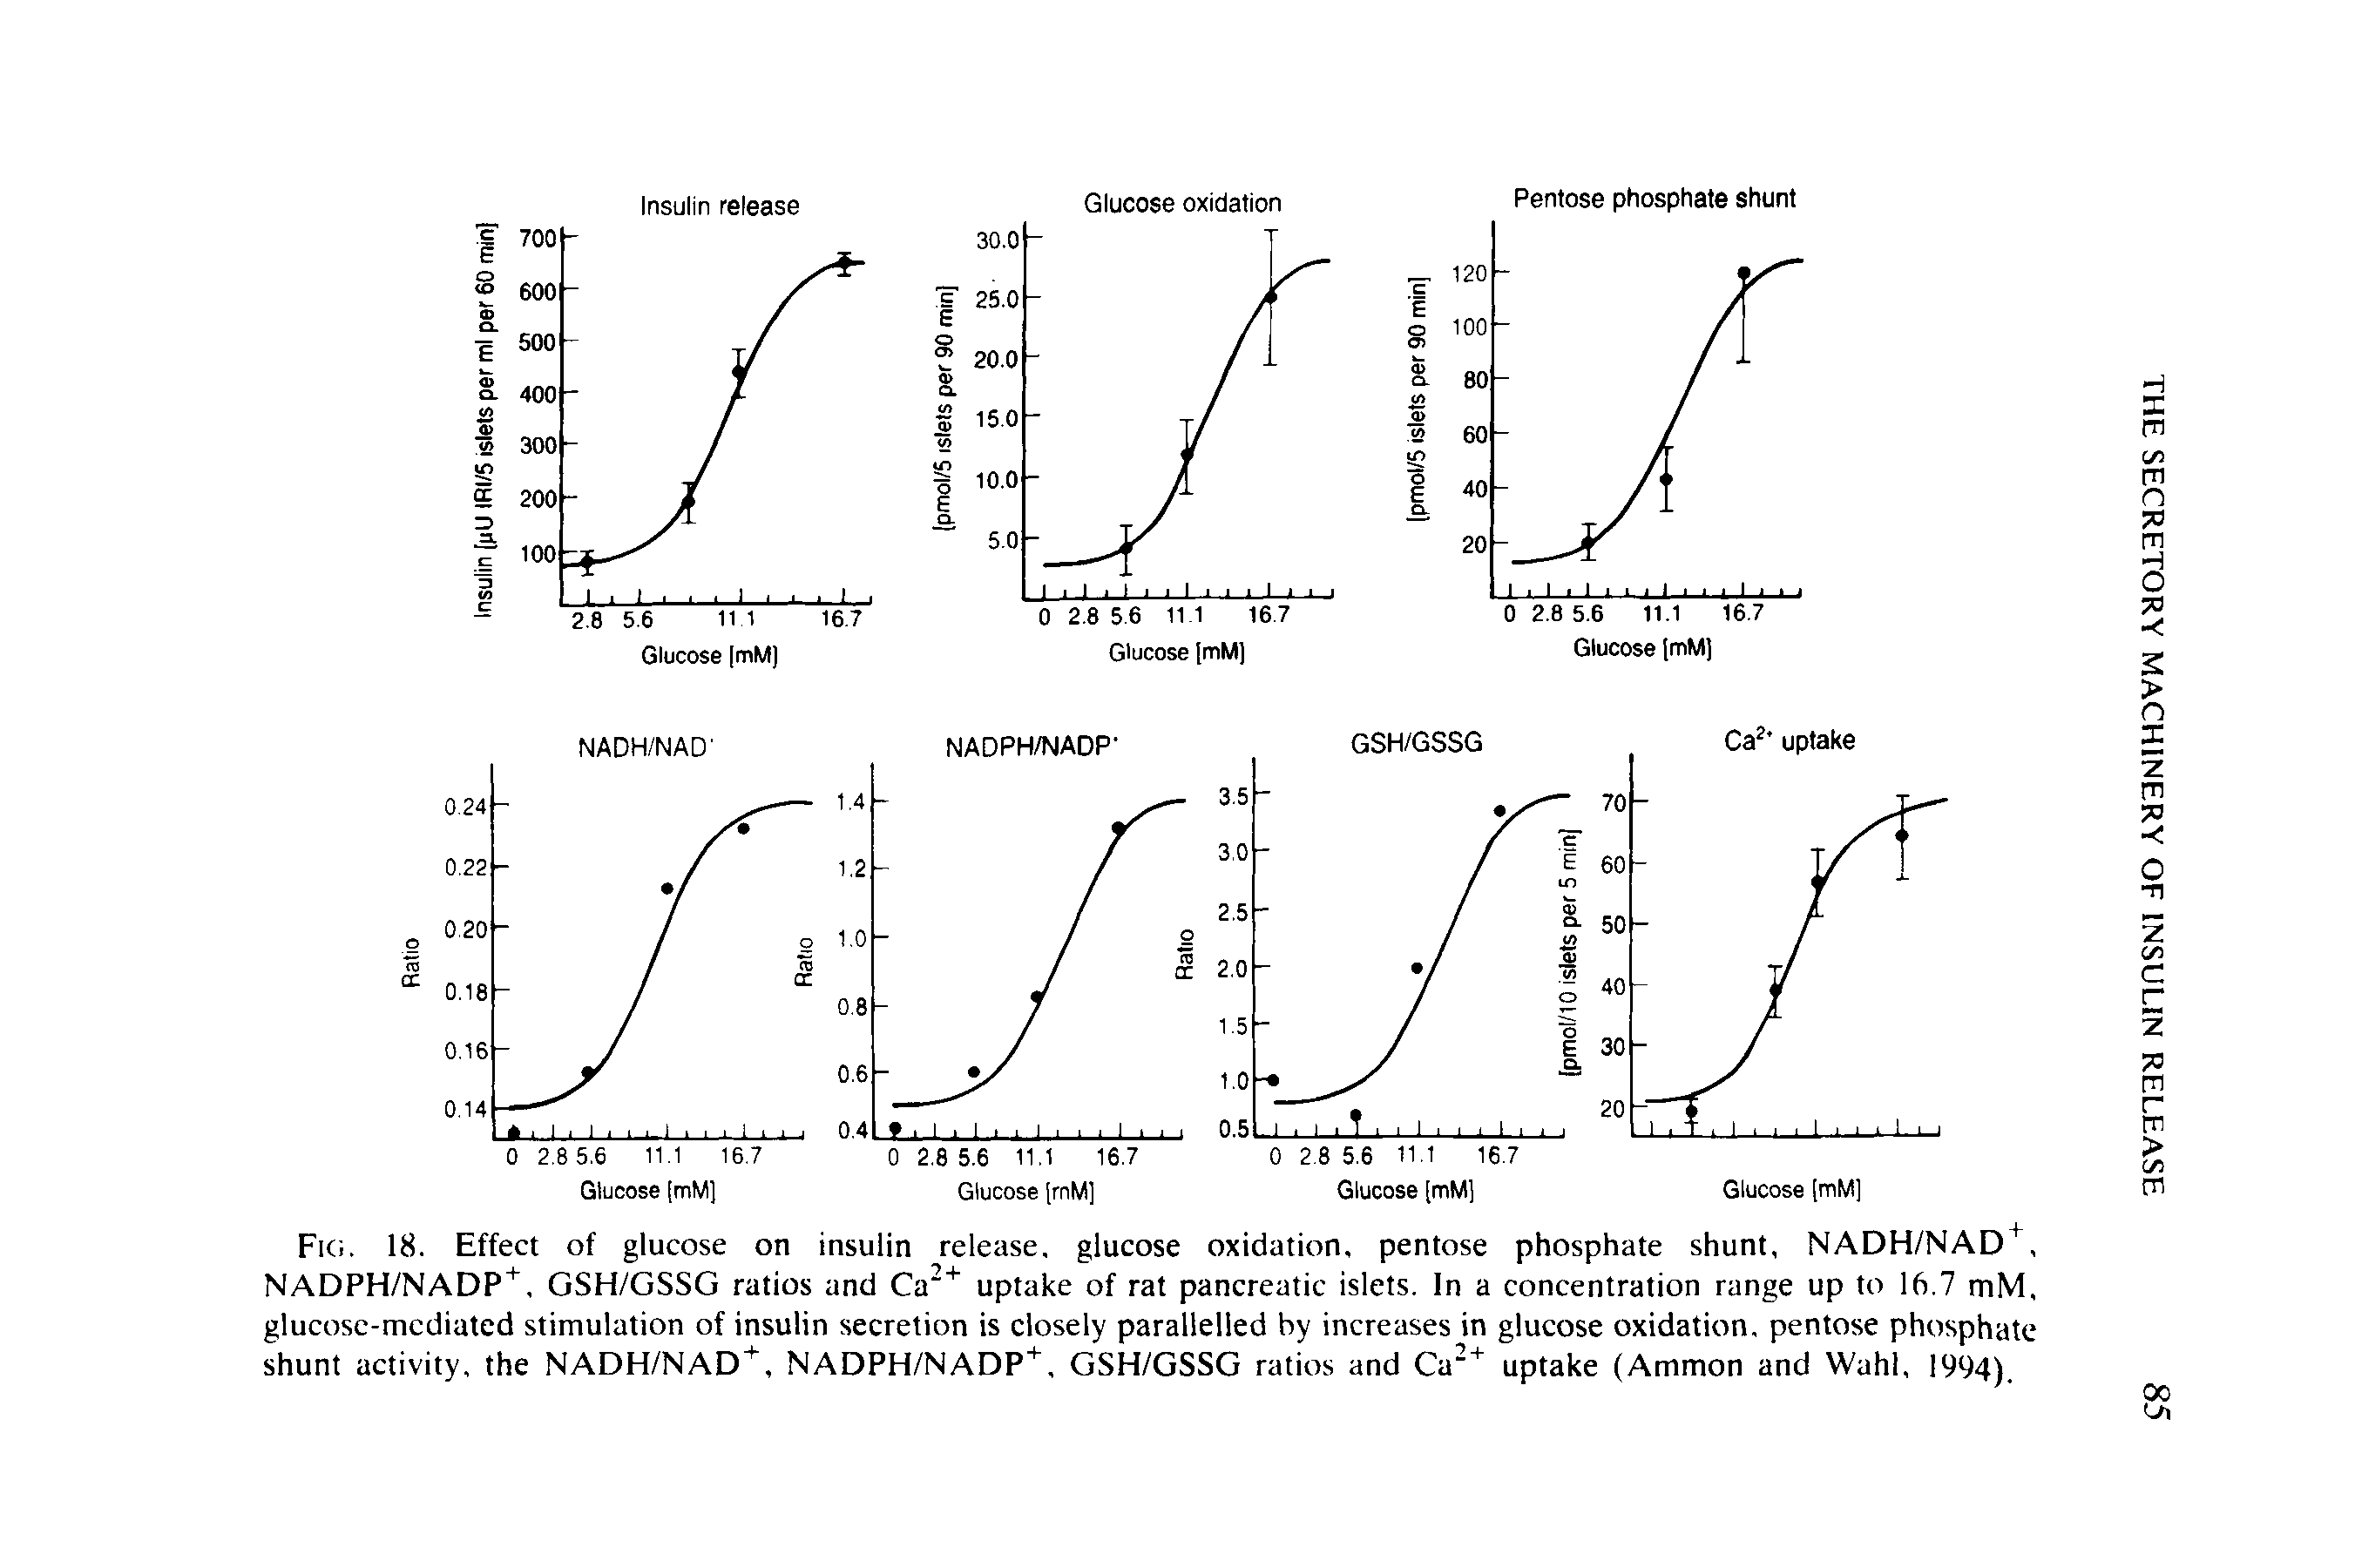 Fig. 18. Effect of glucose on insulin release, glucose oxidation, pentose phosphate shunt, NADH/NAD +, NADPH/NADP"1", GSH/GSSG ratios and Ca + uptake of rat pancreatic islets. In a concentration range up to 16.7 mM, glucose-mediated stimulation of insulin secretion is closely parallelled by increases in glucose oxidation, pentose phosphate shunt activity, the NADH/NAD+, NADPH/NADP+, GSH/GSSG ratios and Ca2+ uptake (Ammon and Wahl, 1994).